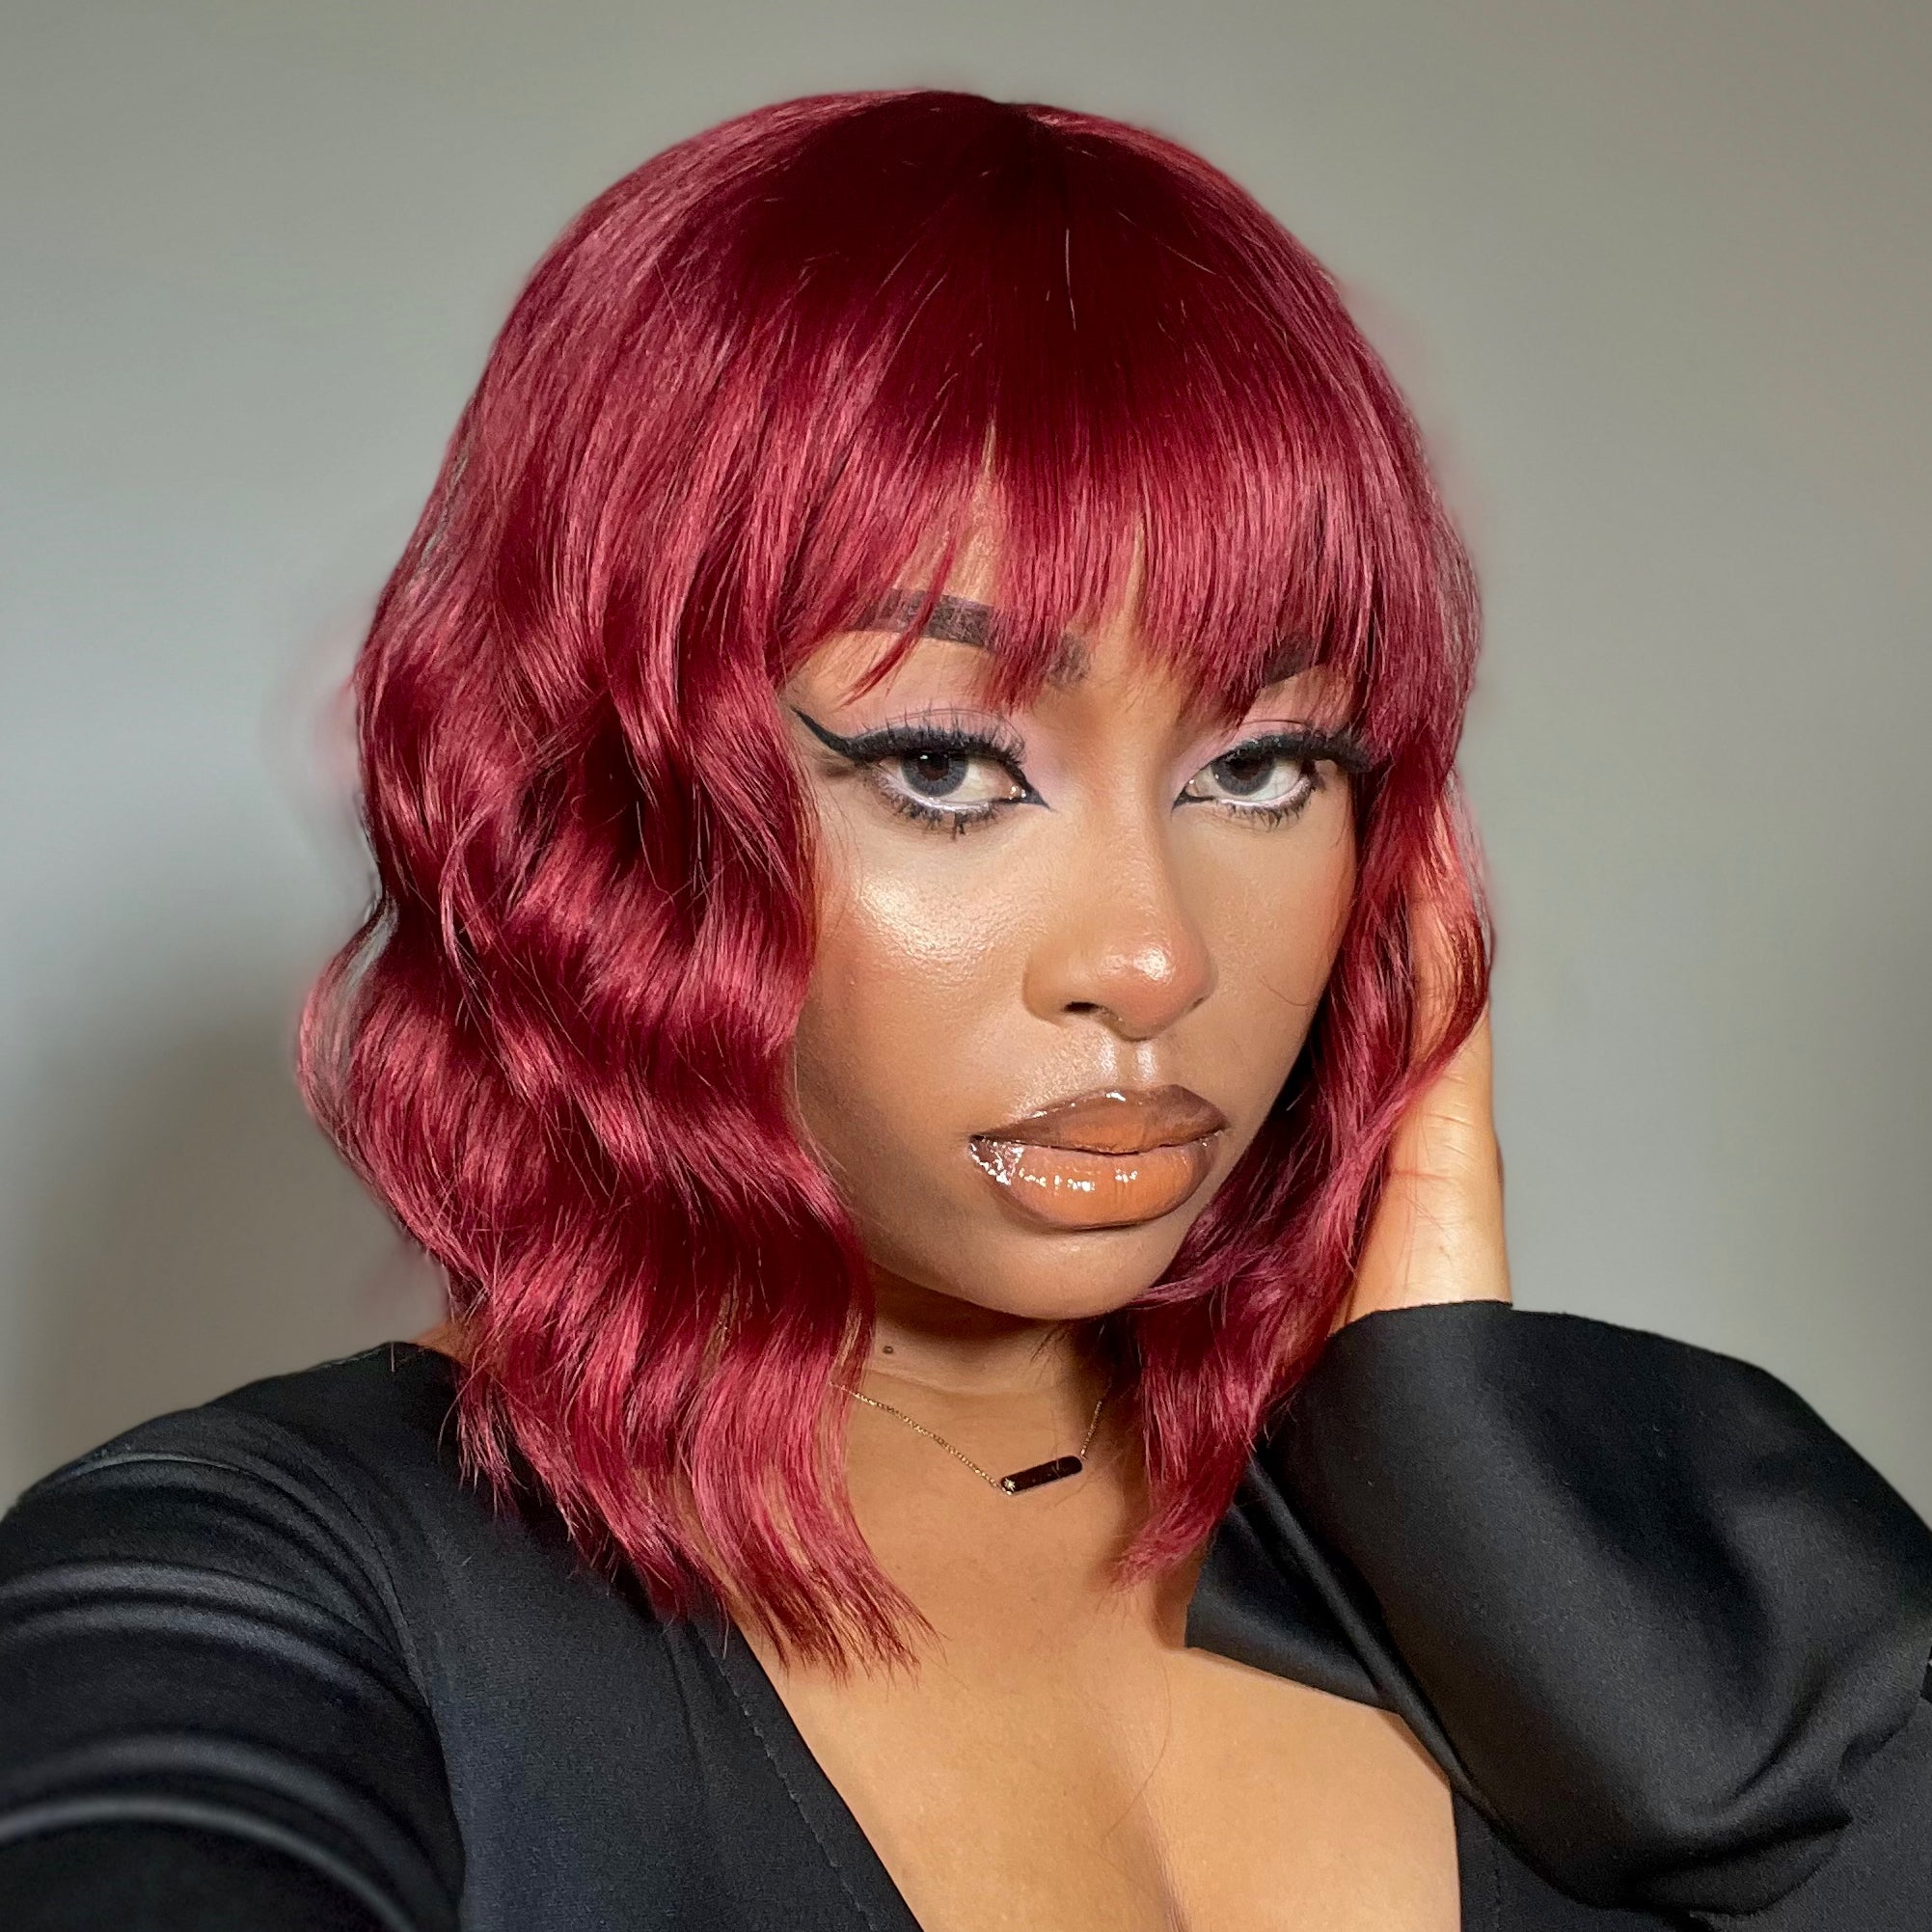 𝗣𝘂𝗺𝗽𝗸𝗶𝗻 𝗦𝗽𝗶𝗰𝗲 𝗧𝗿𝗲𝘀𝘀𝗲𝘀 | TOYOTRESS Pink Paradise LOOSE WAVY SHORT BOB WIGS HD LACE PART WITH BANGS - 12 INCH NATURAL BLACK BOB HAIR WIGS FOR BLACK WOMEN, SHOULDER LENGTH CURLY SYNTHETIC WIGS(LF0926)